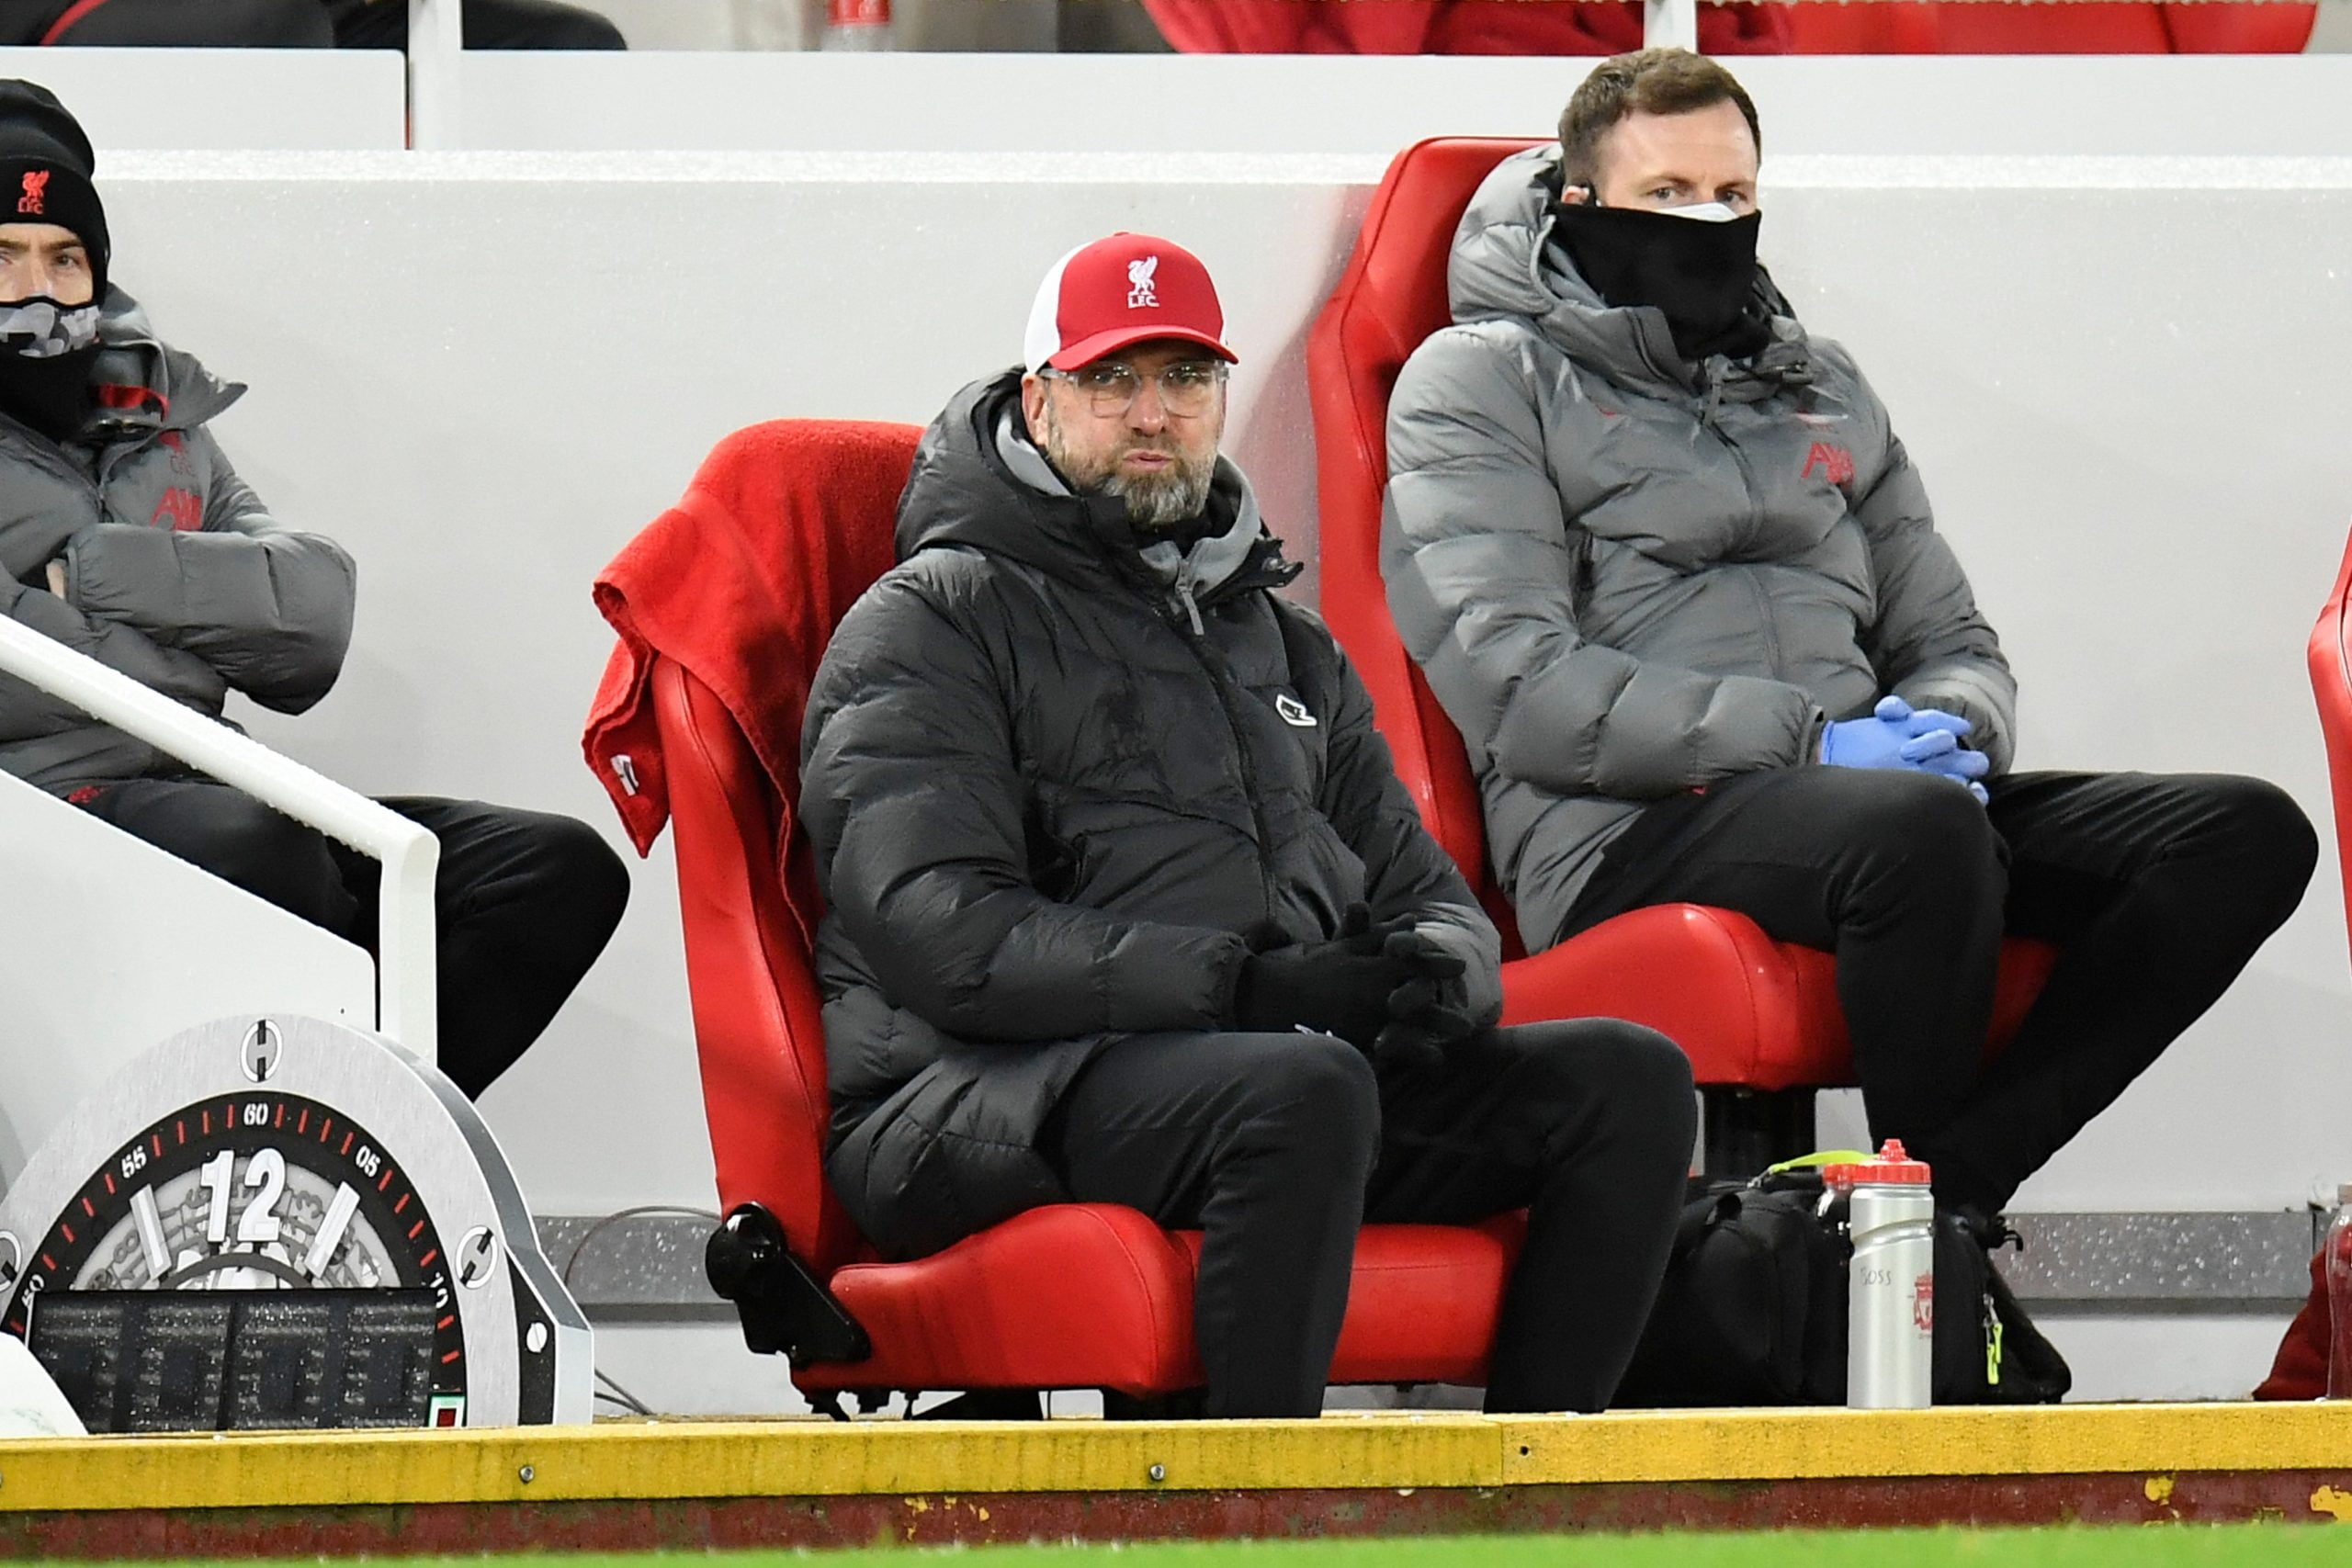 Changes Klopp should make for Liverpool to win vs Tottenham (Liverpool boss Jurgen Klopp is sitting in the picture)